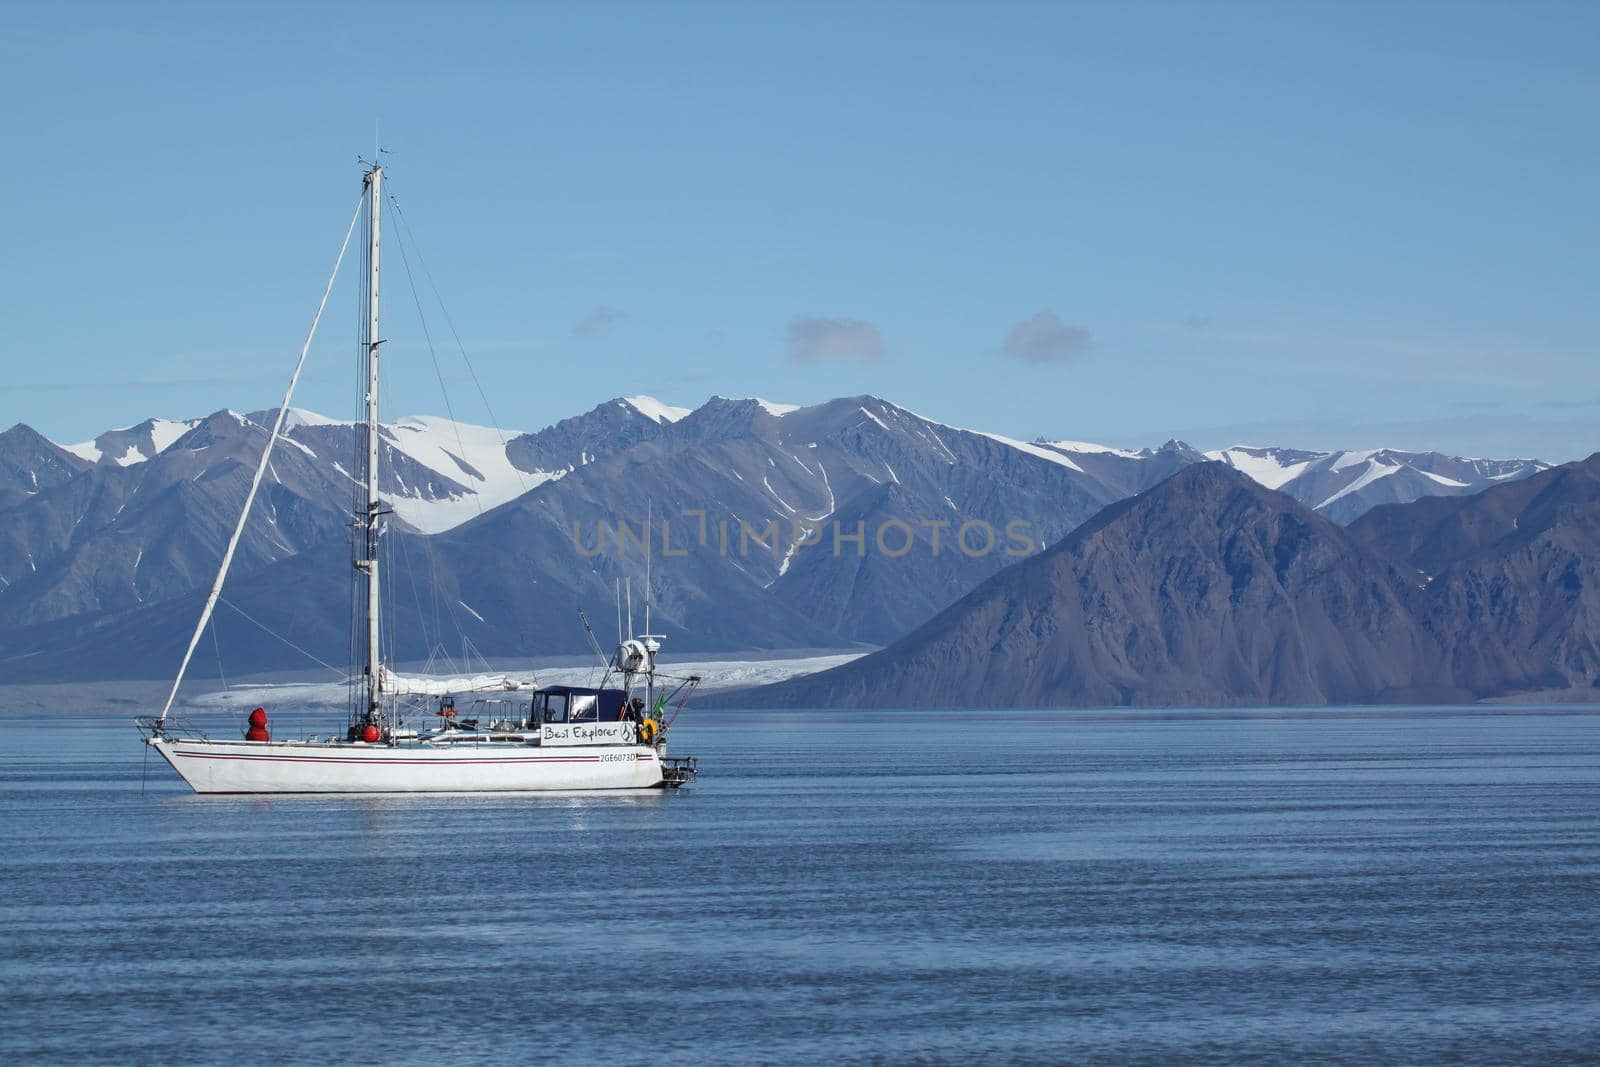 A sailboat anchored near Pond Inlet, Nunavut waiting for weather to transit through the Northwest Passage by Granchinho